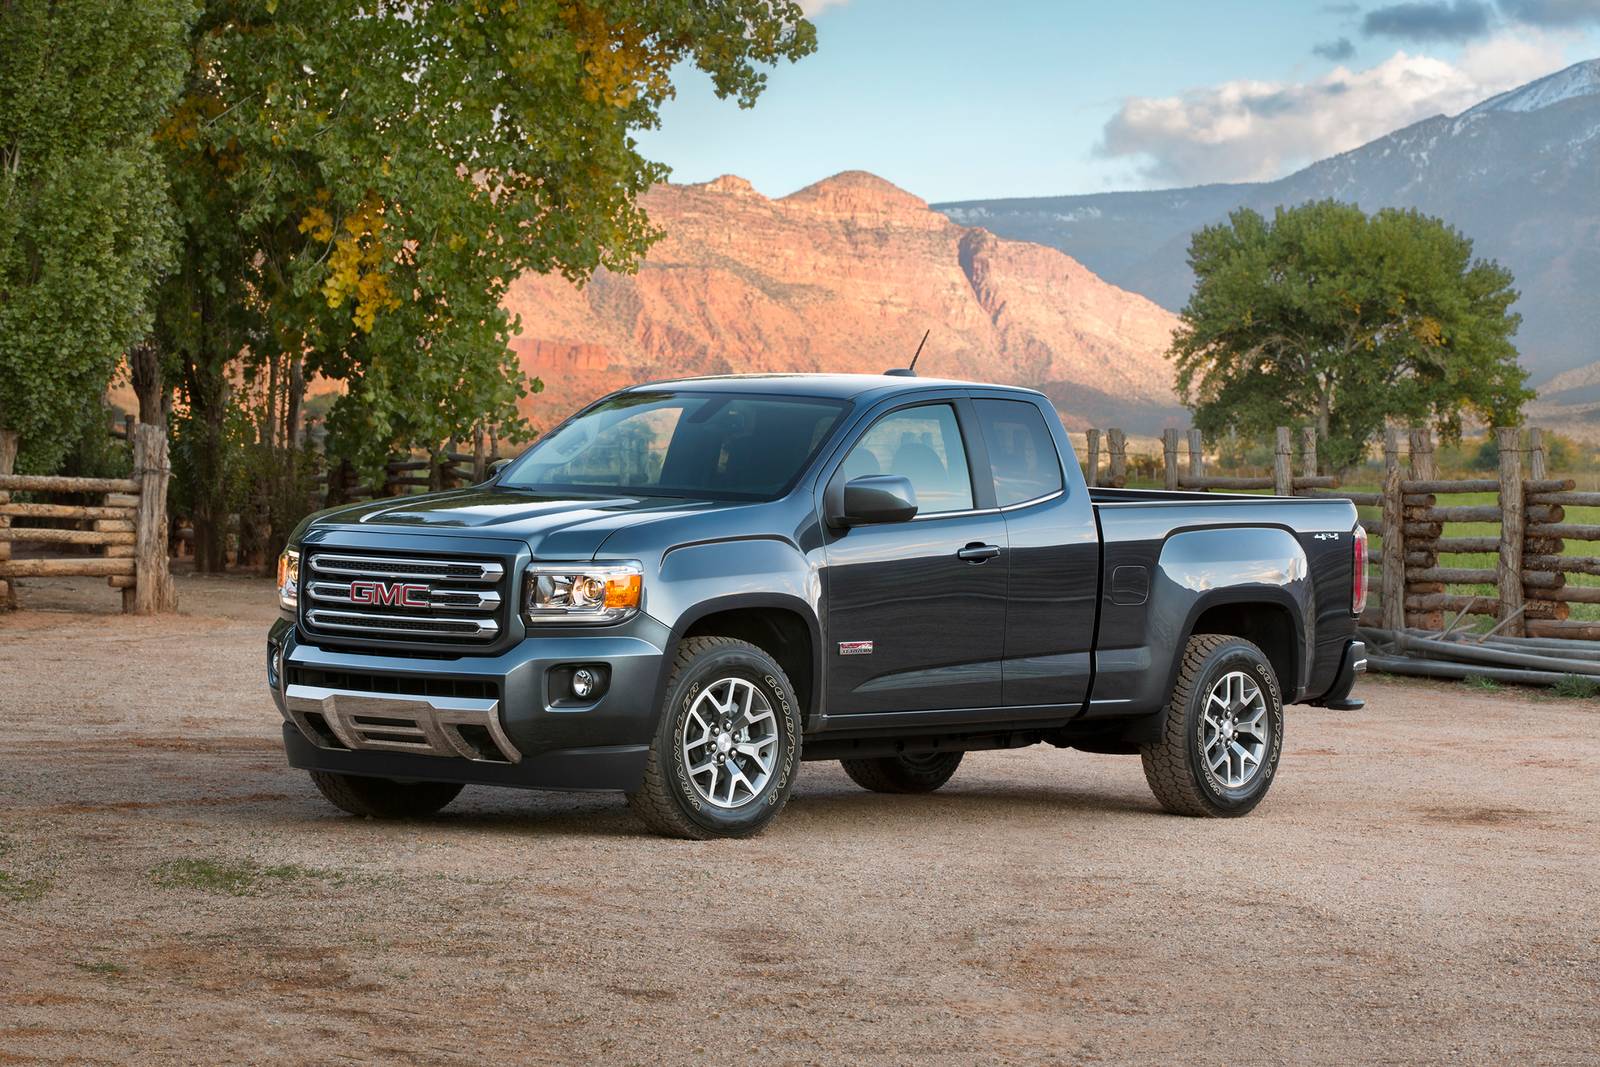 Used 2018 GMC Canyon Extended Cab Review | Edmunds